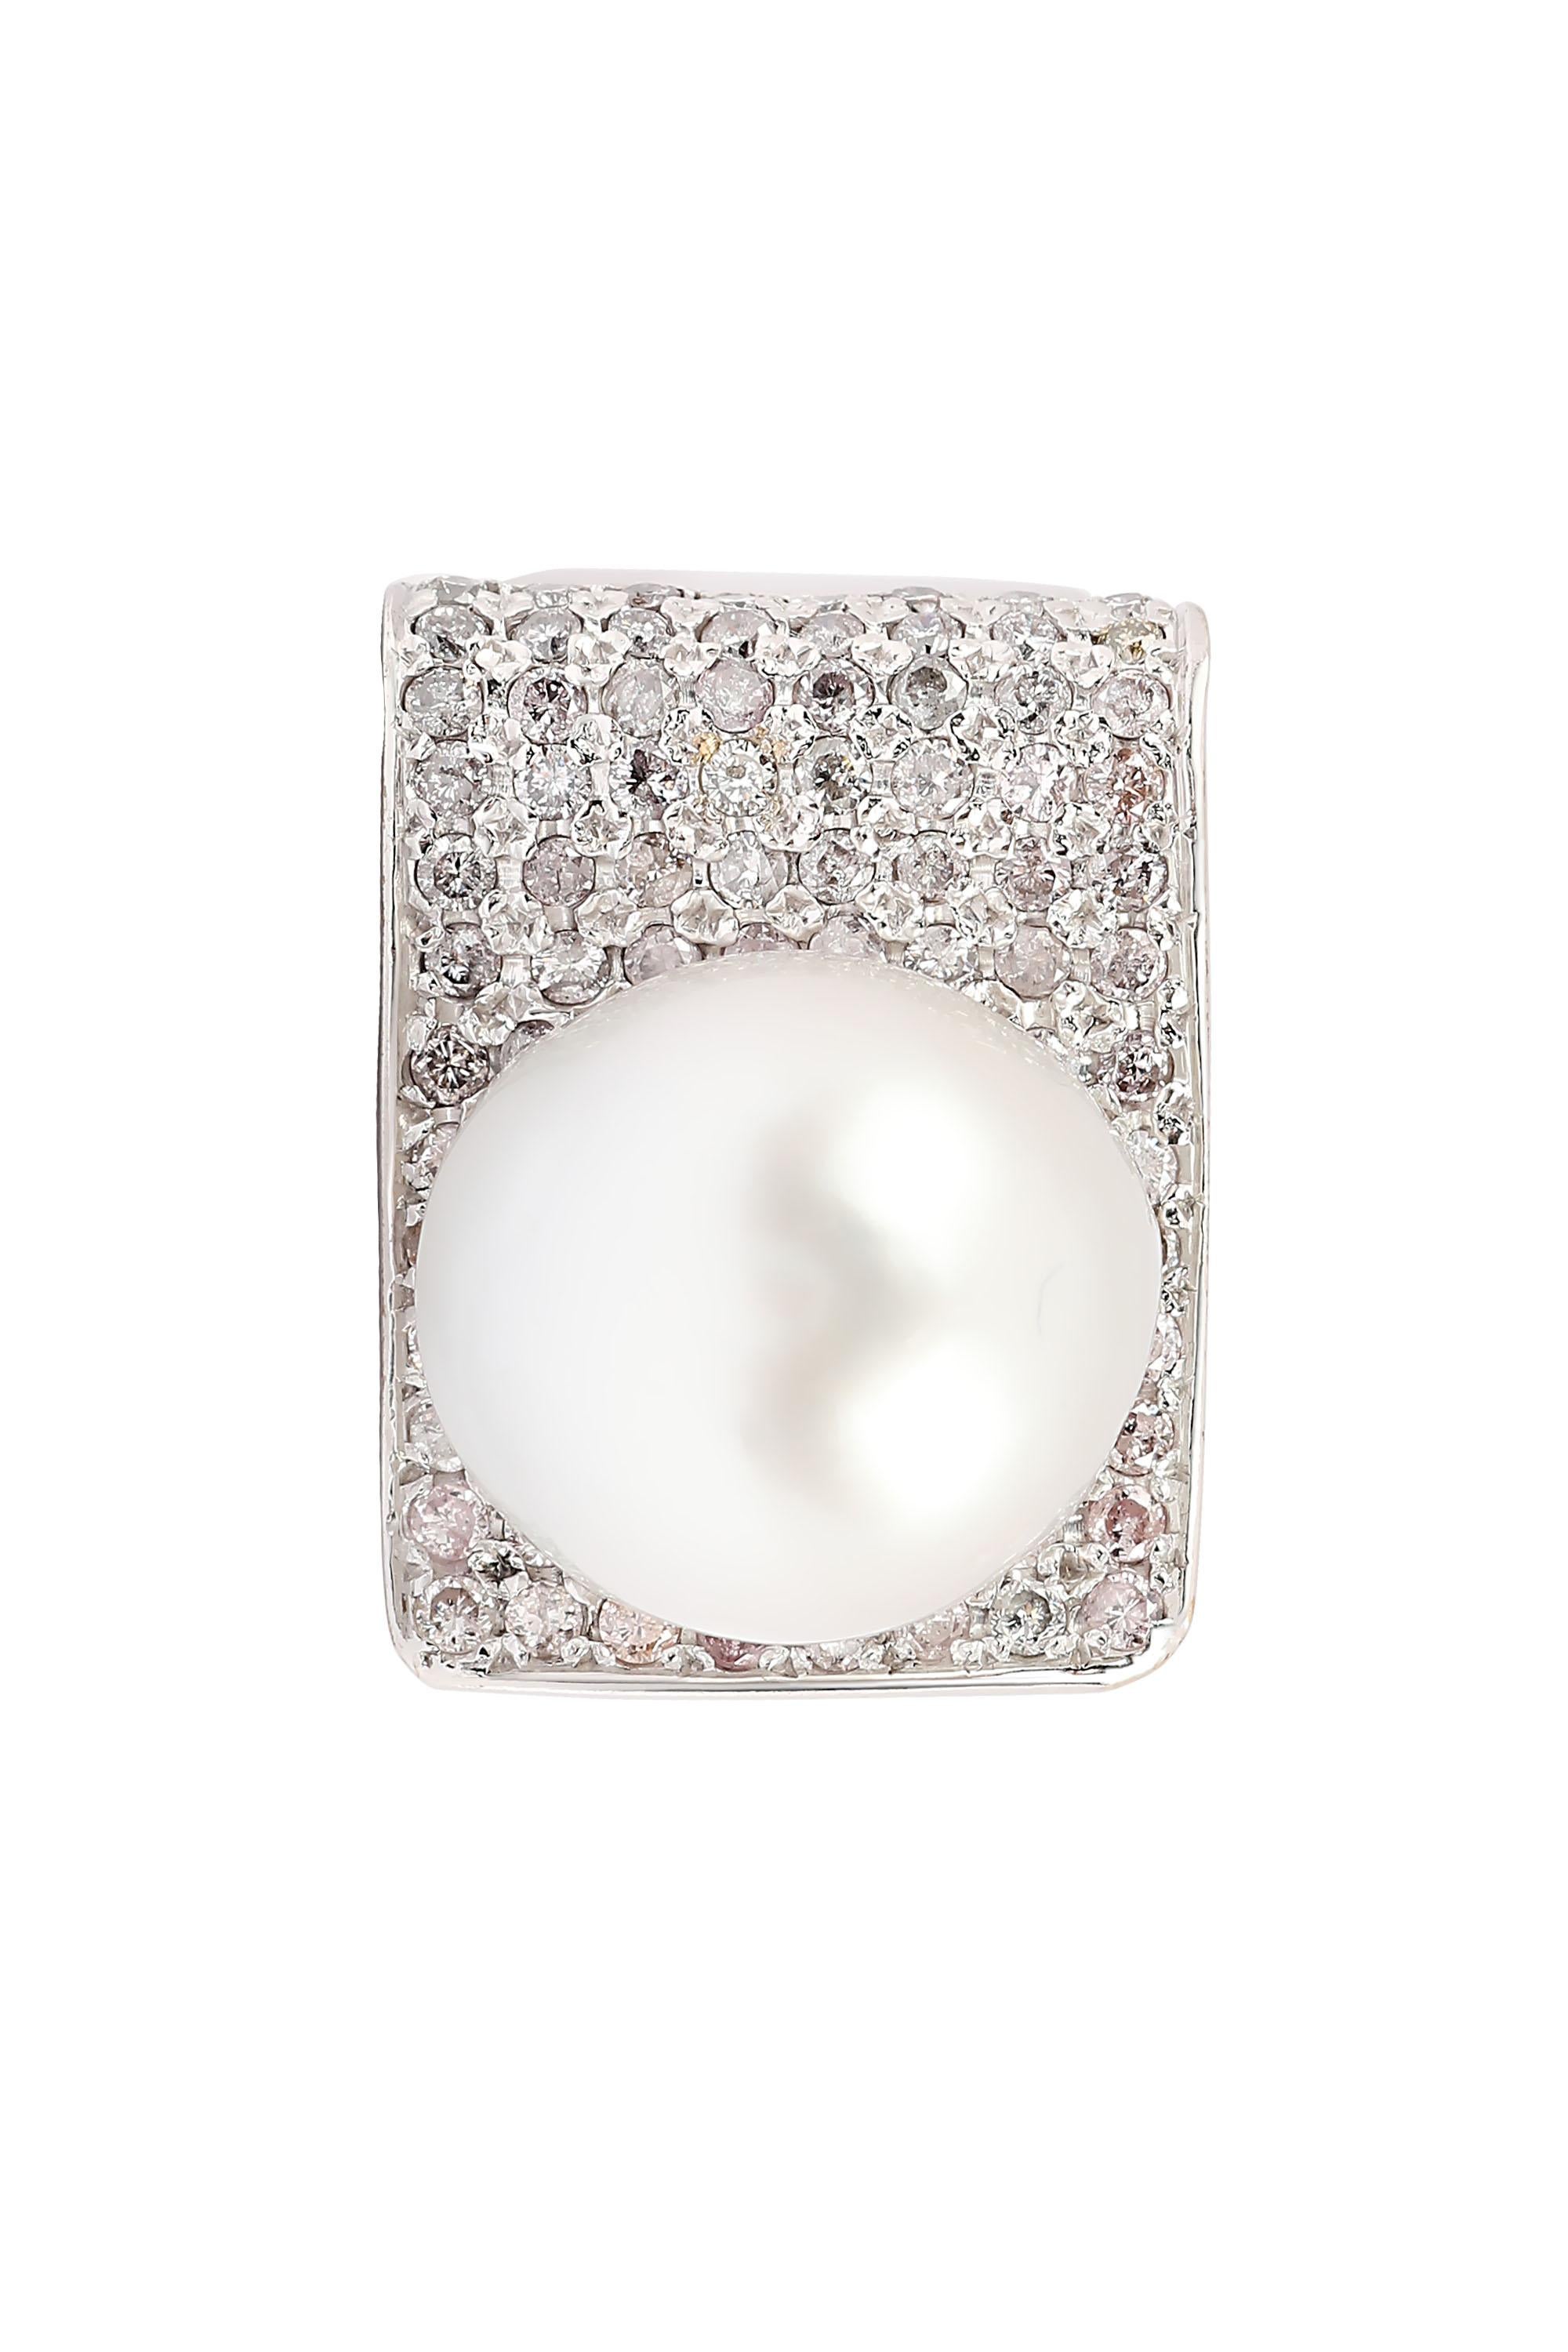 South Sea Pearl and Diamond Ring, Earrings and Pendant Set For Sale 3